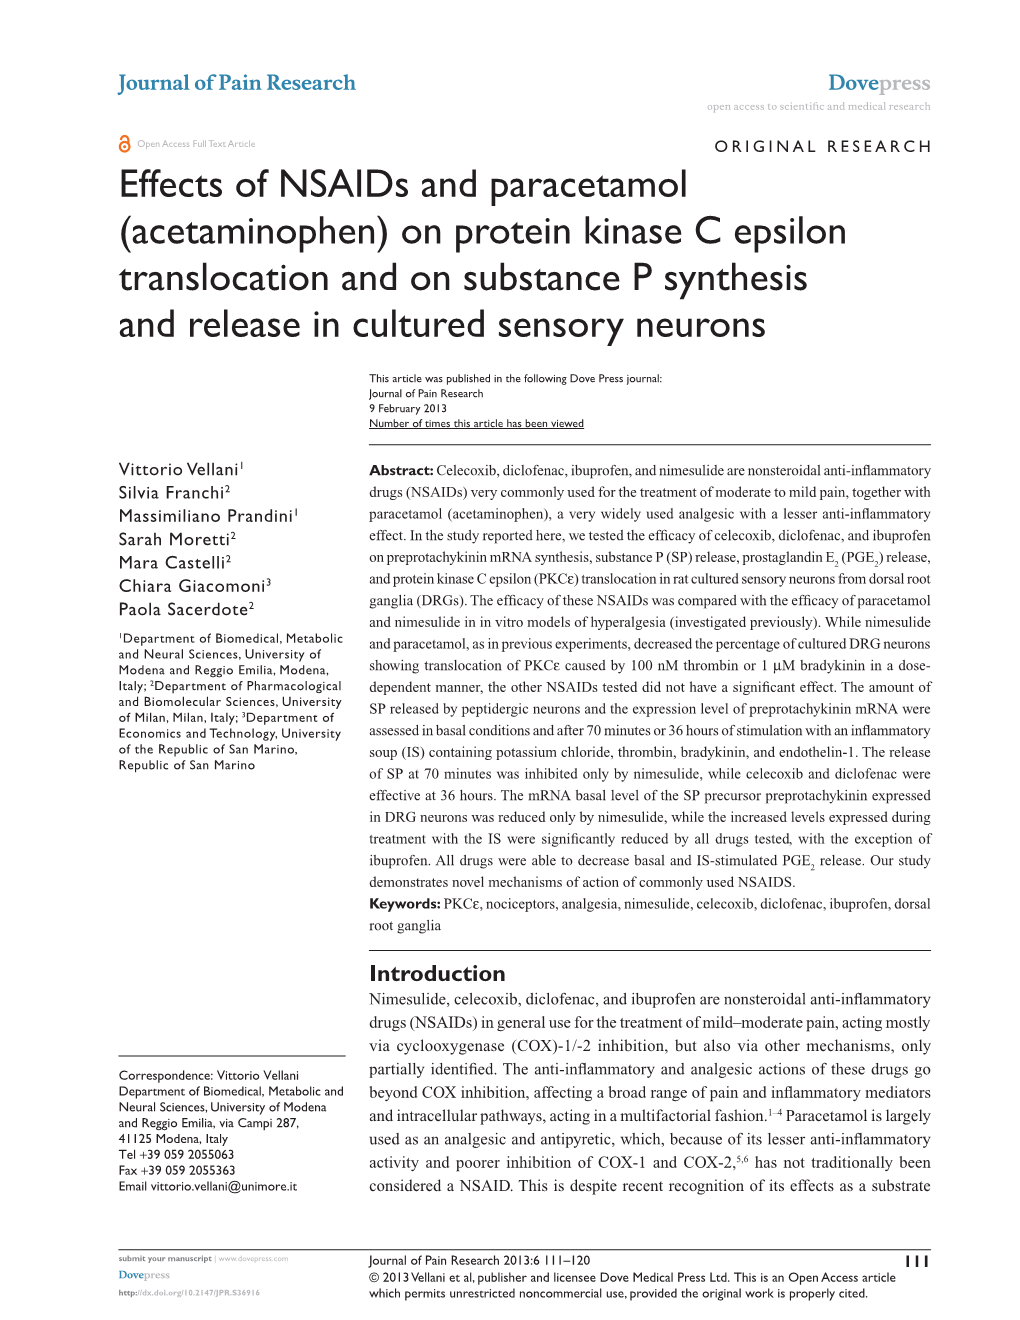 Effects of Nsaids and Paracetamol (Acetaminophen) on Protein Kinase C Epsilon Translocation and on Substance P Synthesis and Release in Cultured Sensory Neurons